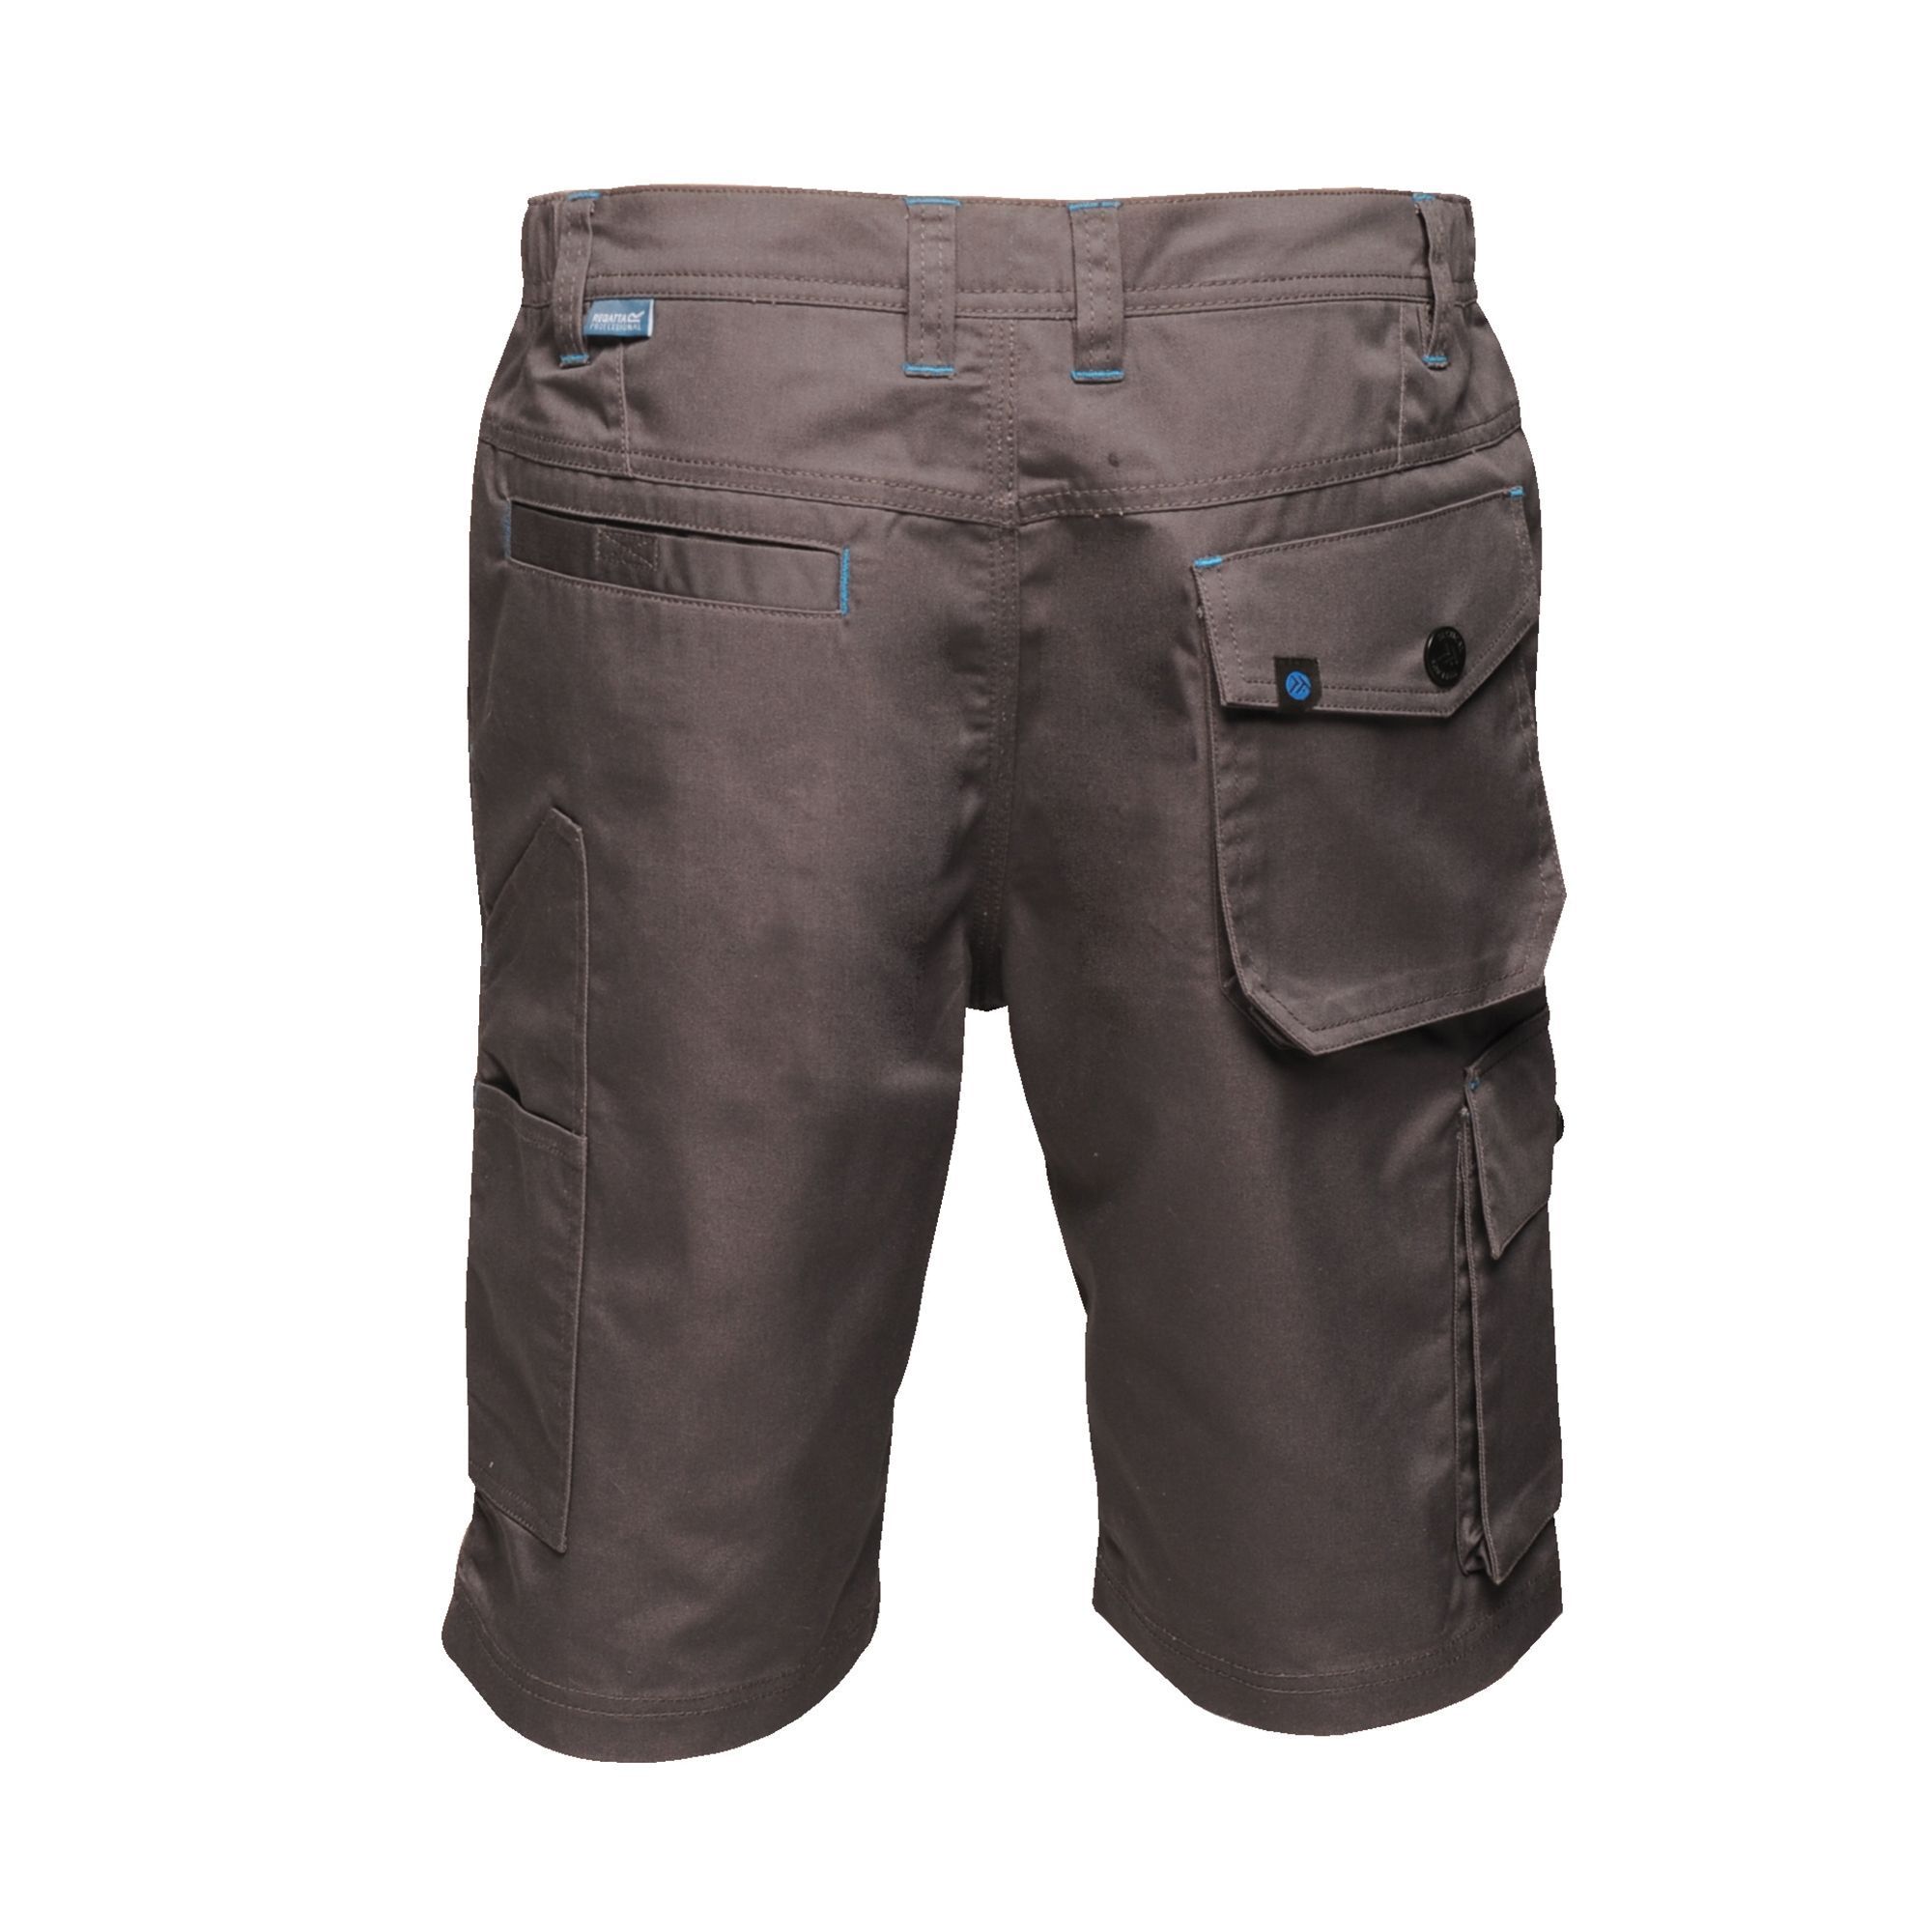 Material: 65% polyester, 35% cotton. Durable water repellent finish. Part elasticated waist. Belt loops. Zip fly opening. Metal shank button to CF fasten. 2 front pockets, 1 side cargo pocket button fasten and 2 rear pockets. Side leg ruler pocket. Reinforced crotch seam. Reinforced seams with triple stitching.